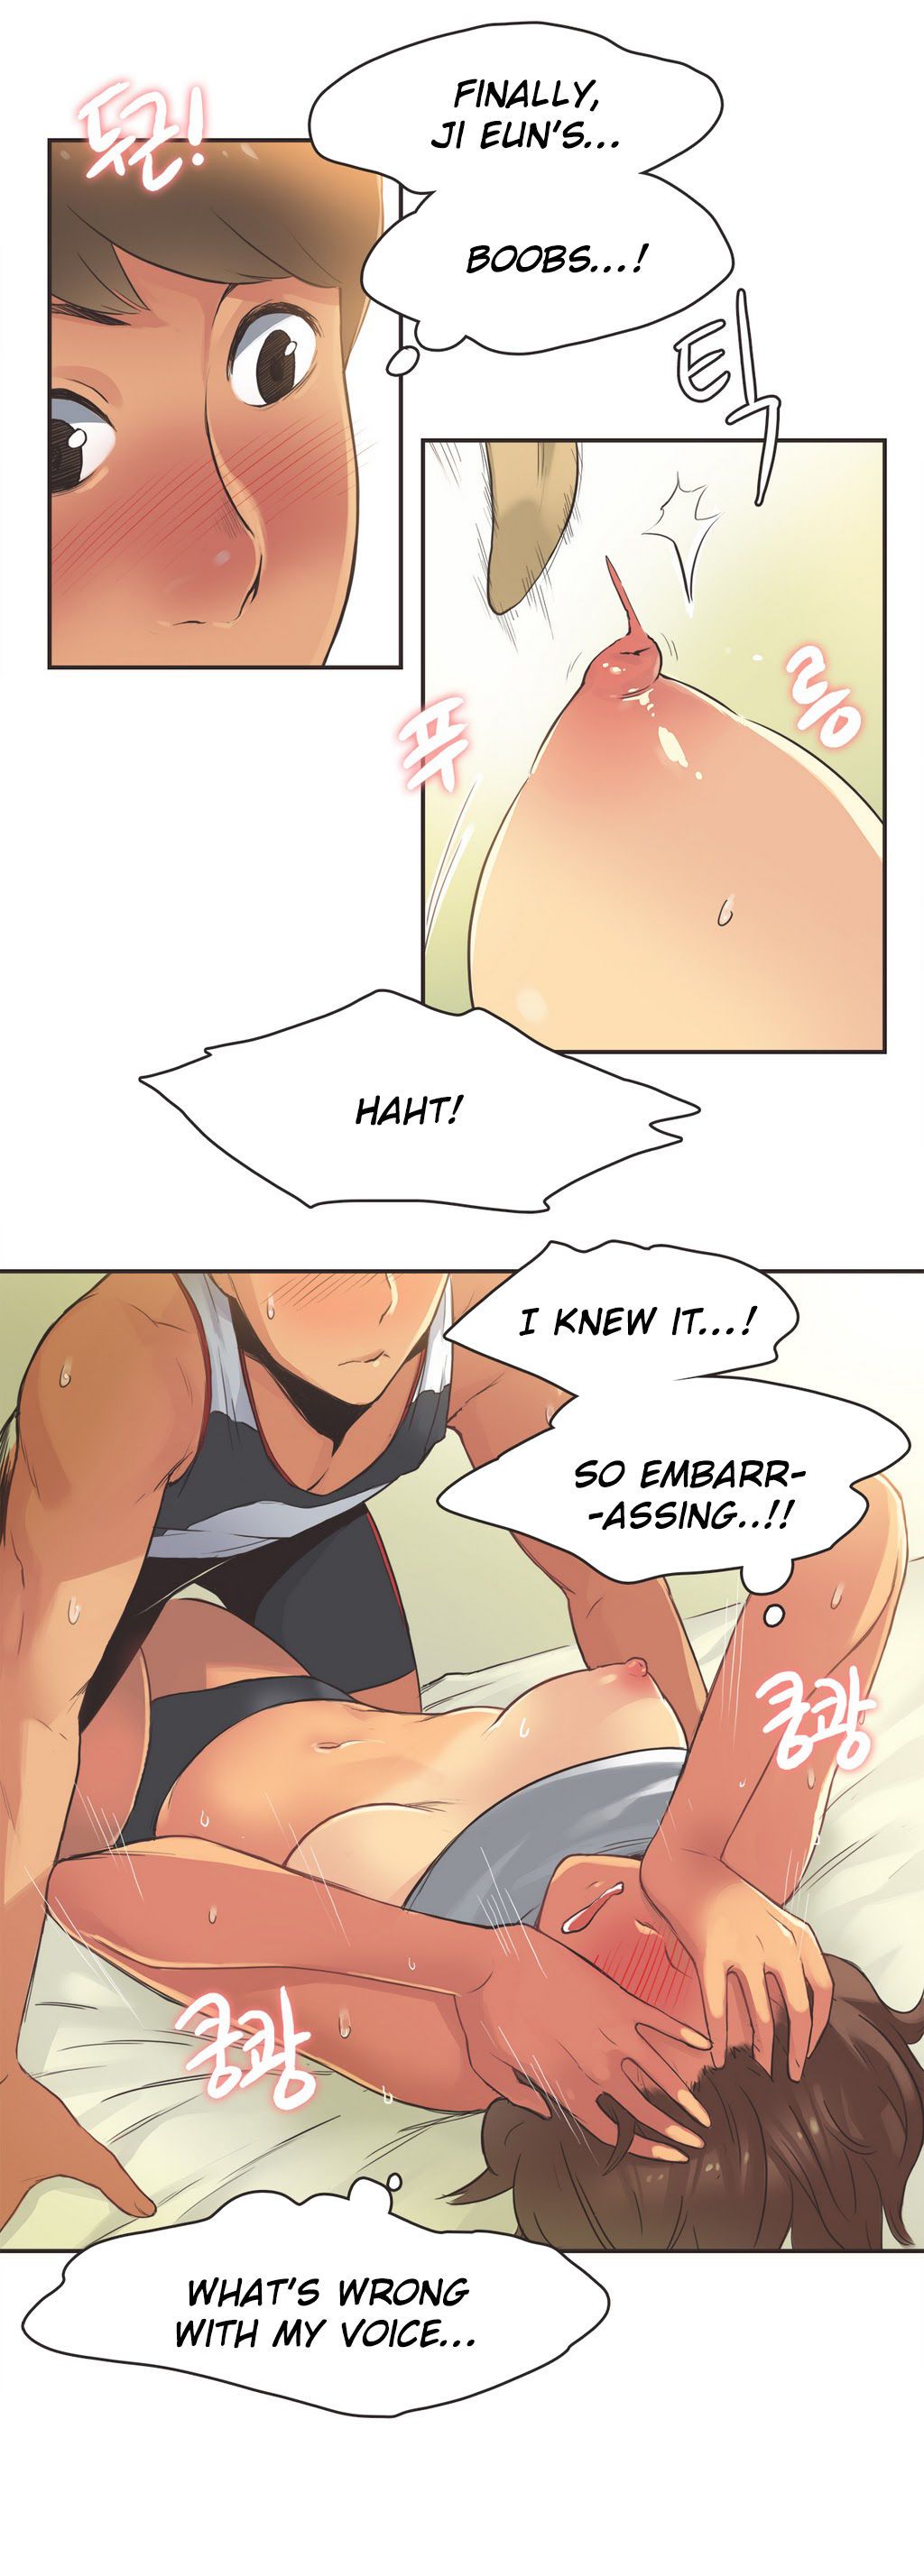 gamang sports Fille ch.1 28 () (yomanga) PARTIE 14